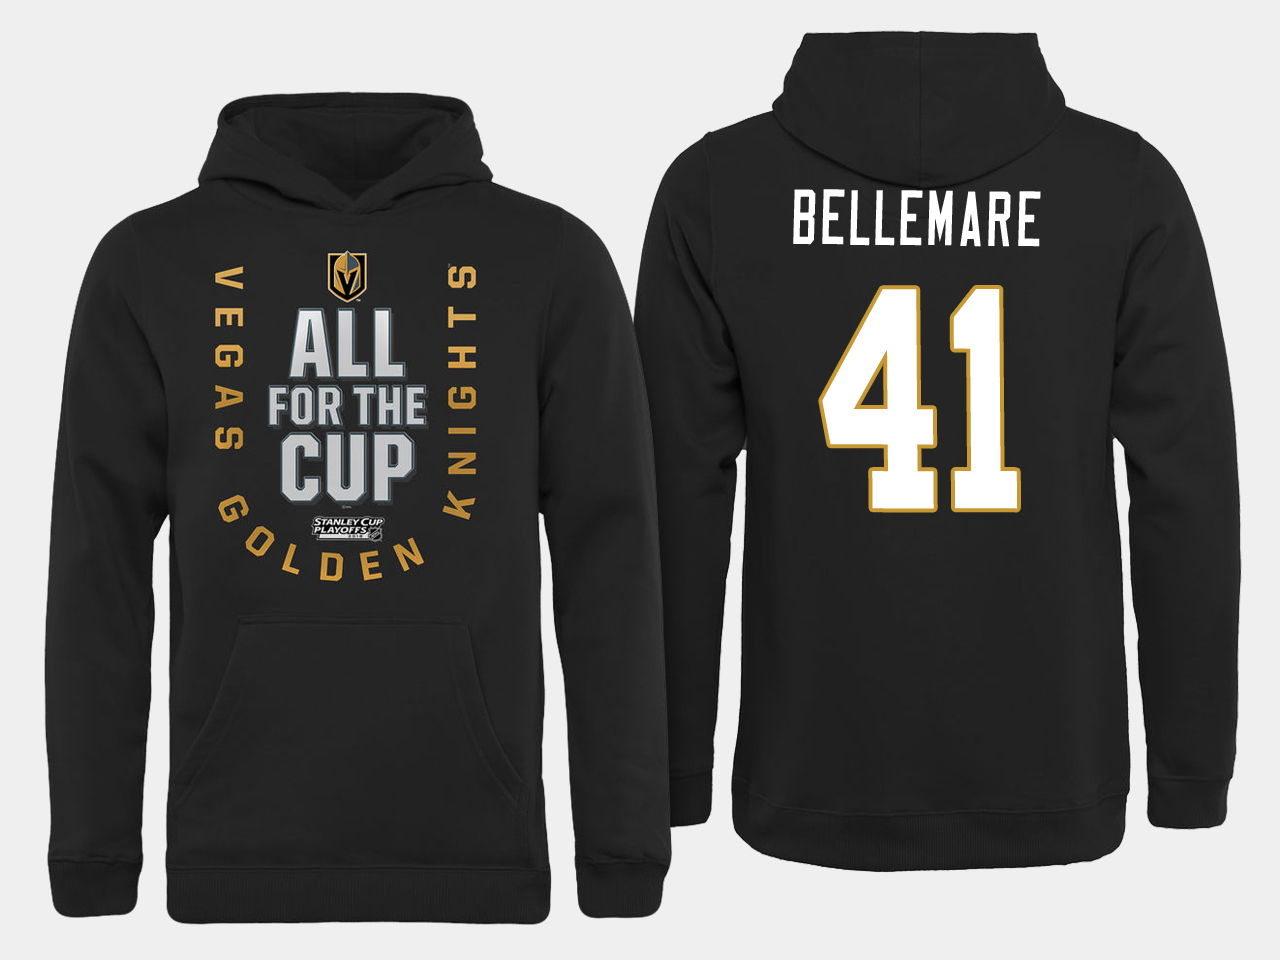 Men NHL Vegas Golden Knights #41 Bellemare All for the Cup hoodie->more nhl jerseys->NHL Jersey